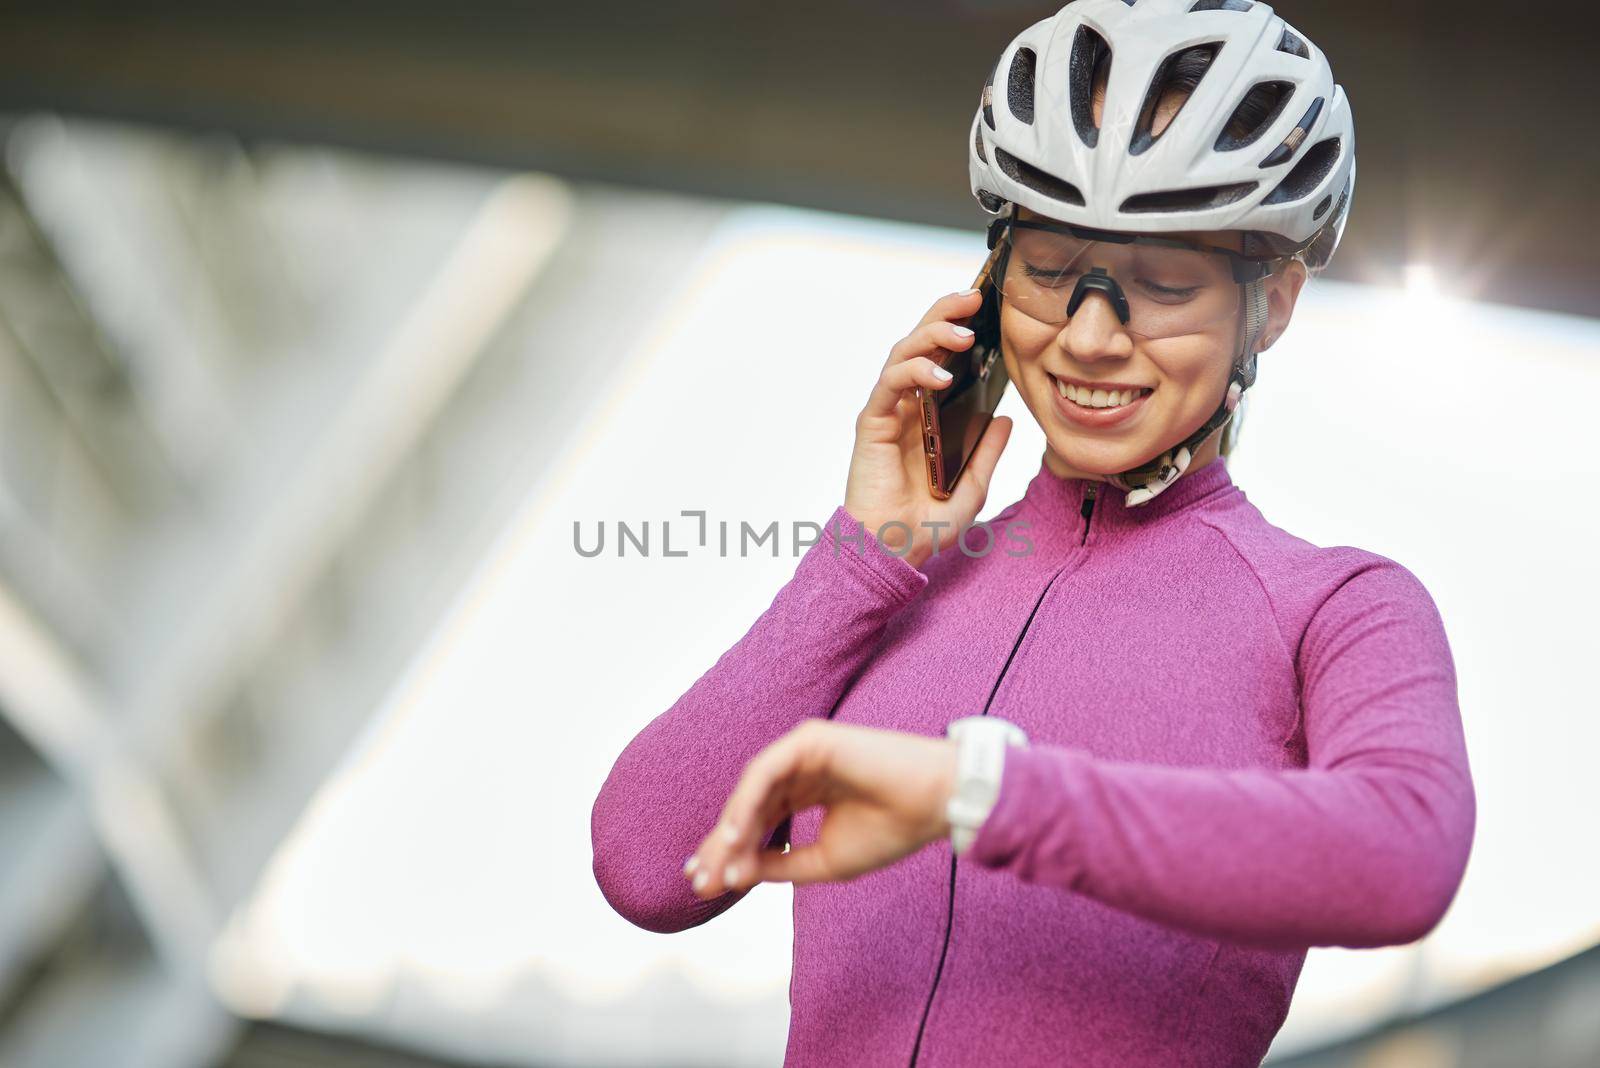 Cheerful young female cyclist wearing protective helmet and glasses looking at smartwatch on her wrist while talking on the phone, standing outdoors on a daytime. Safety, sports, technology concept